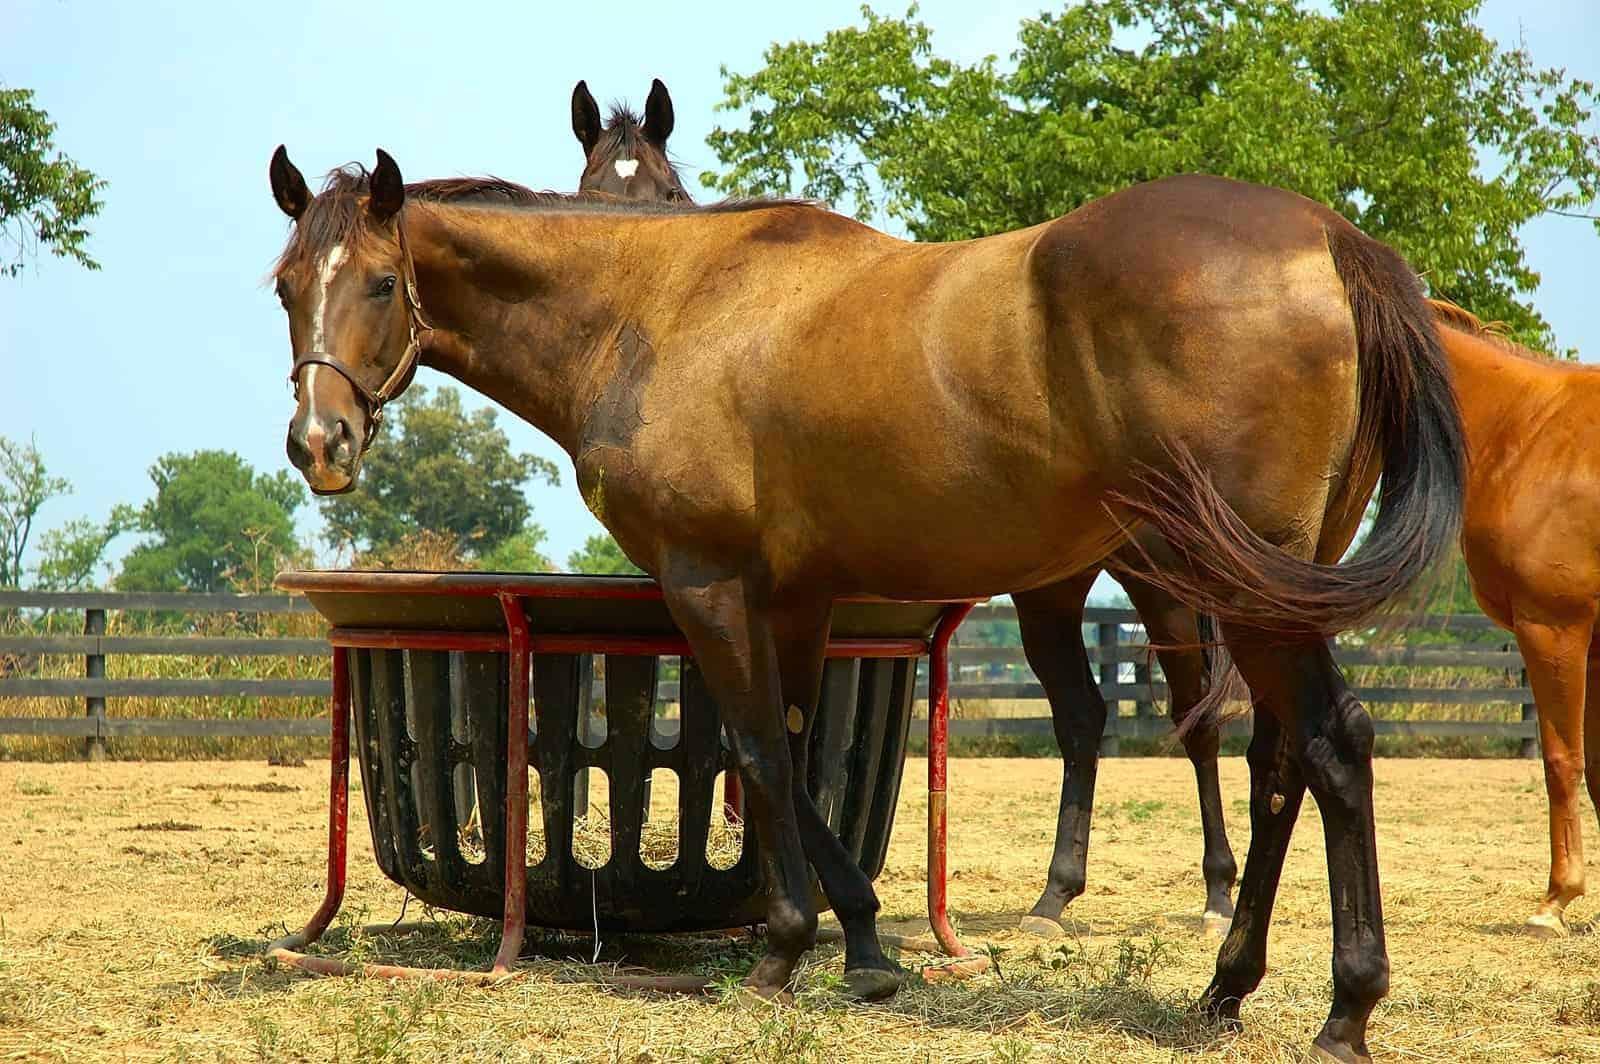 What Nutrients Does a Horse Need? – The Horse